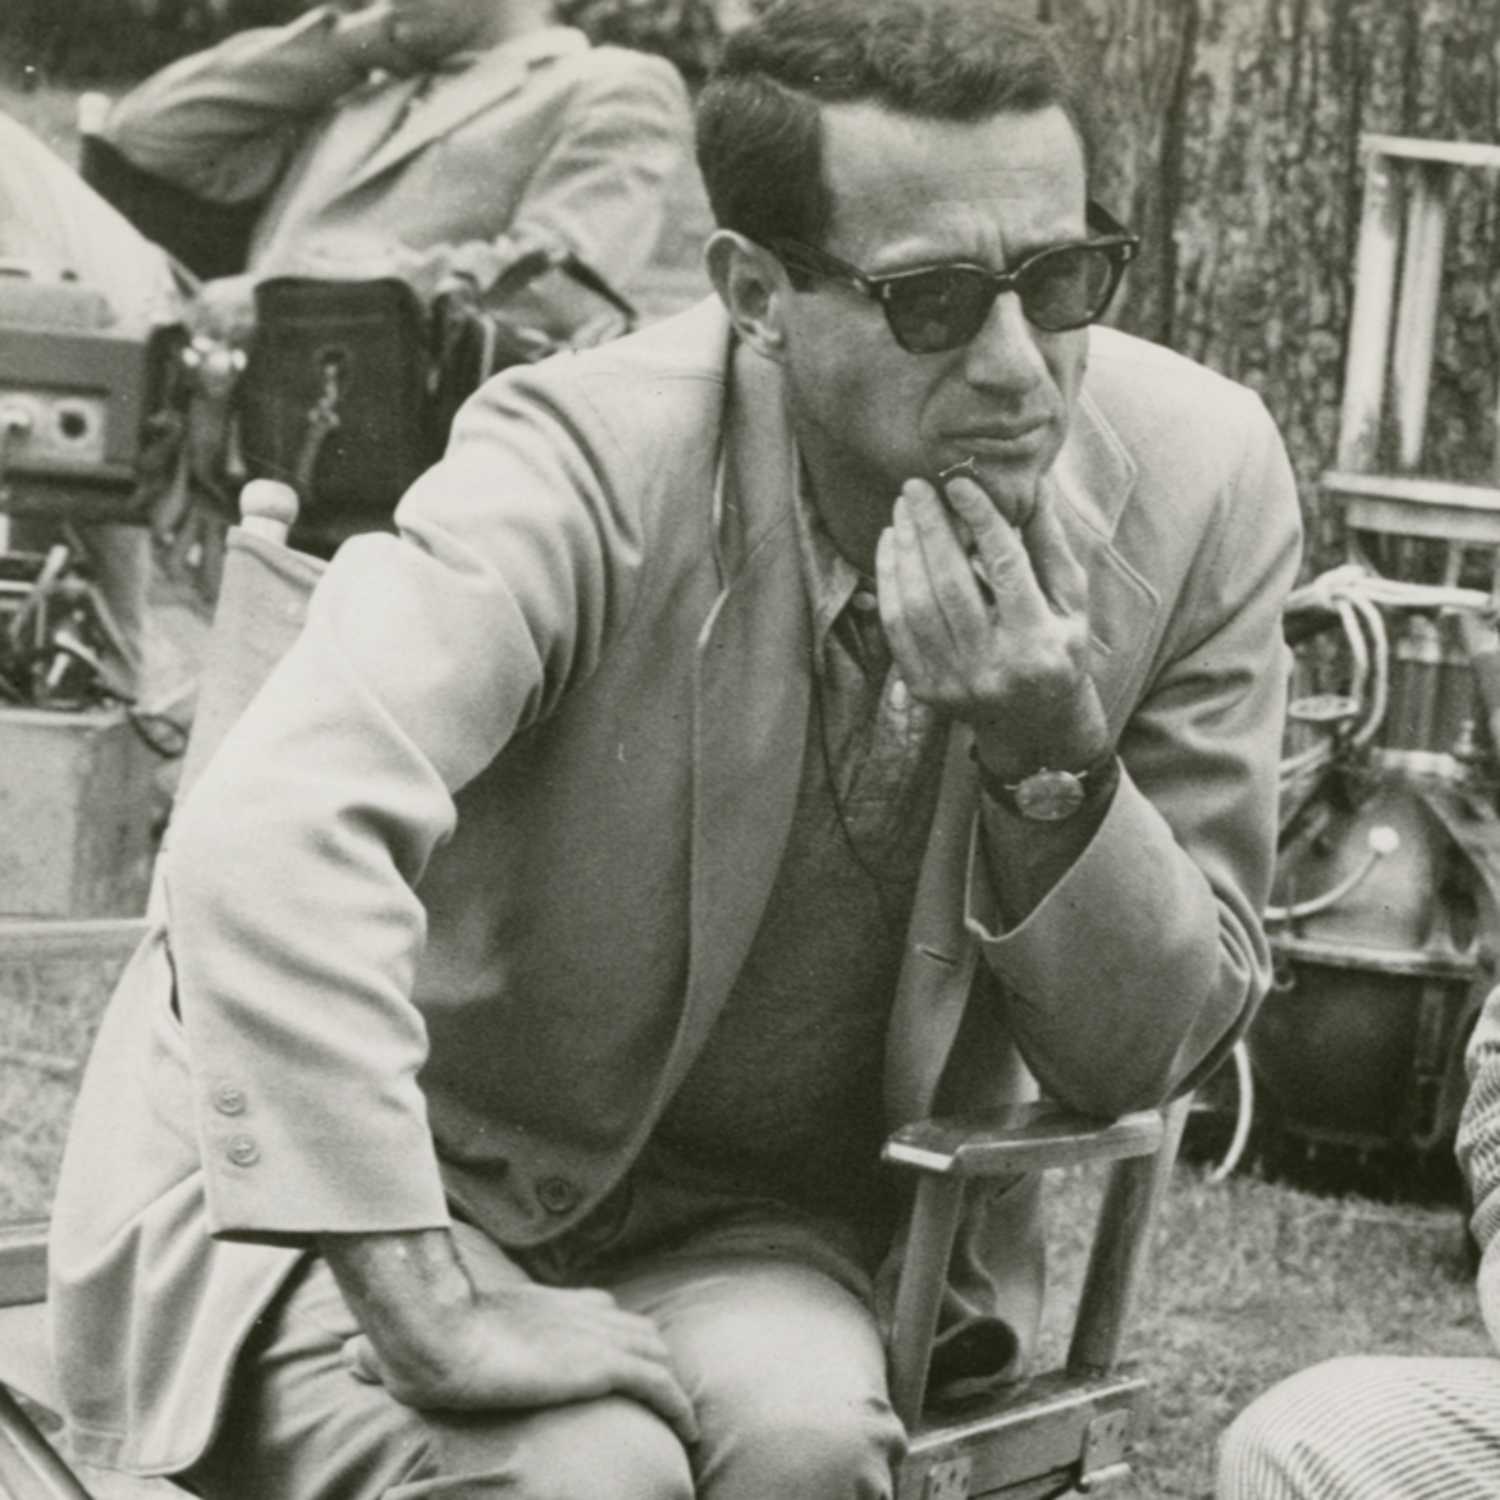 Arthur Penn: "It was a film that was not going to be quieted."